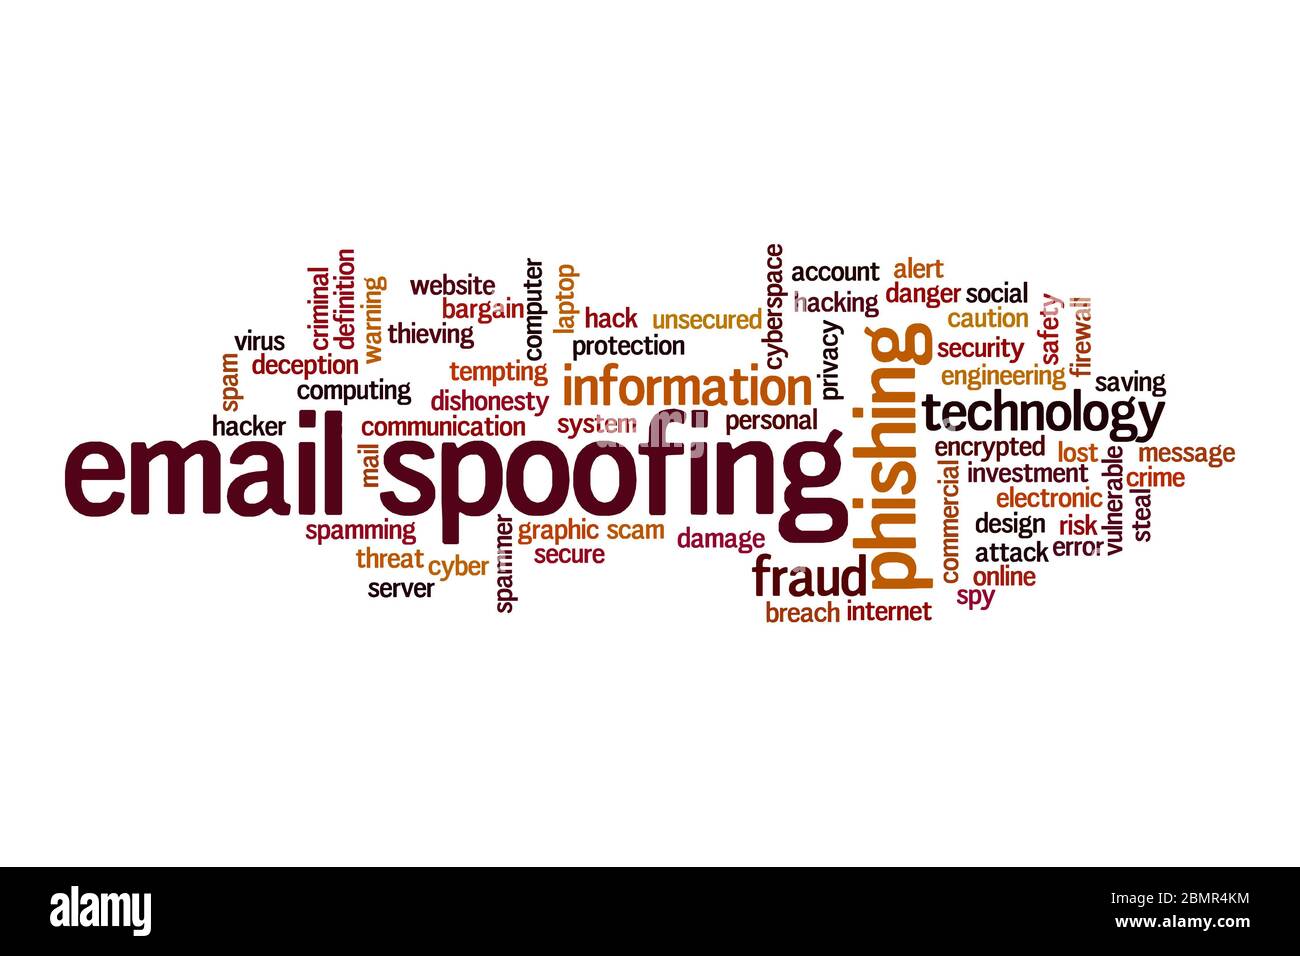 Email spoofing word cloud concept on white background Stock Photo